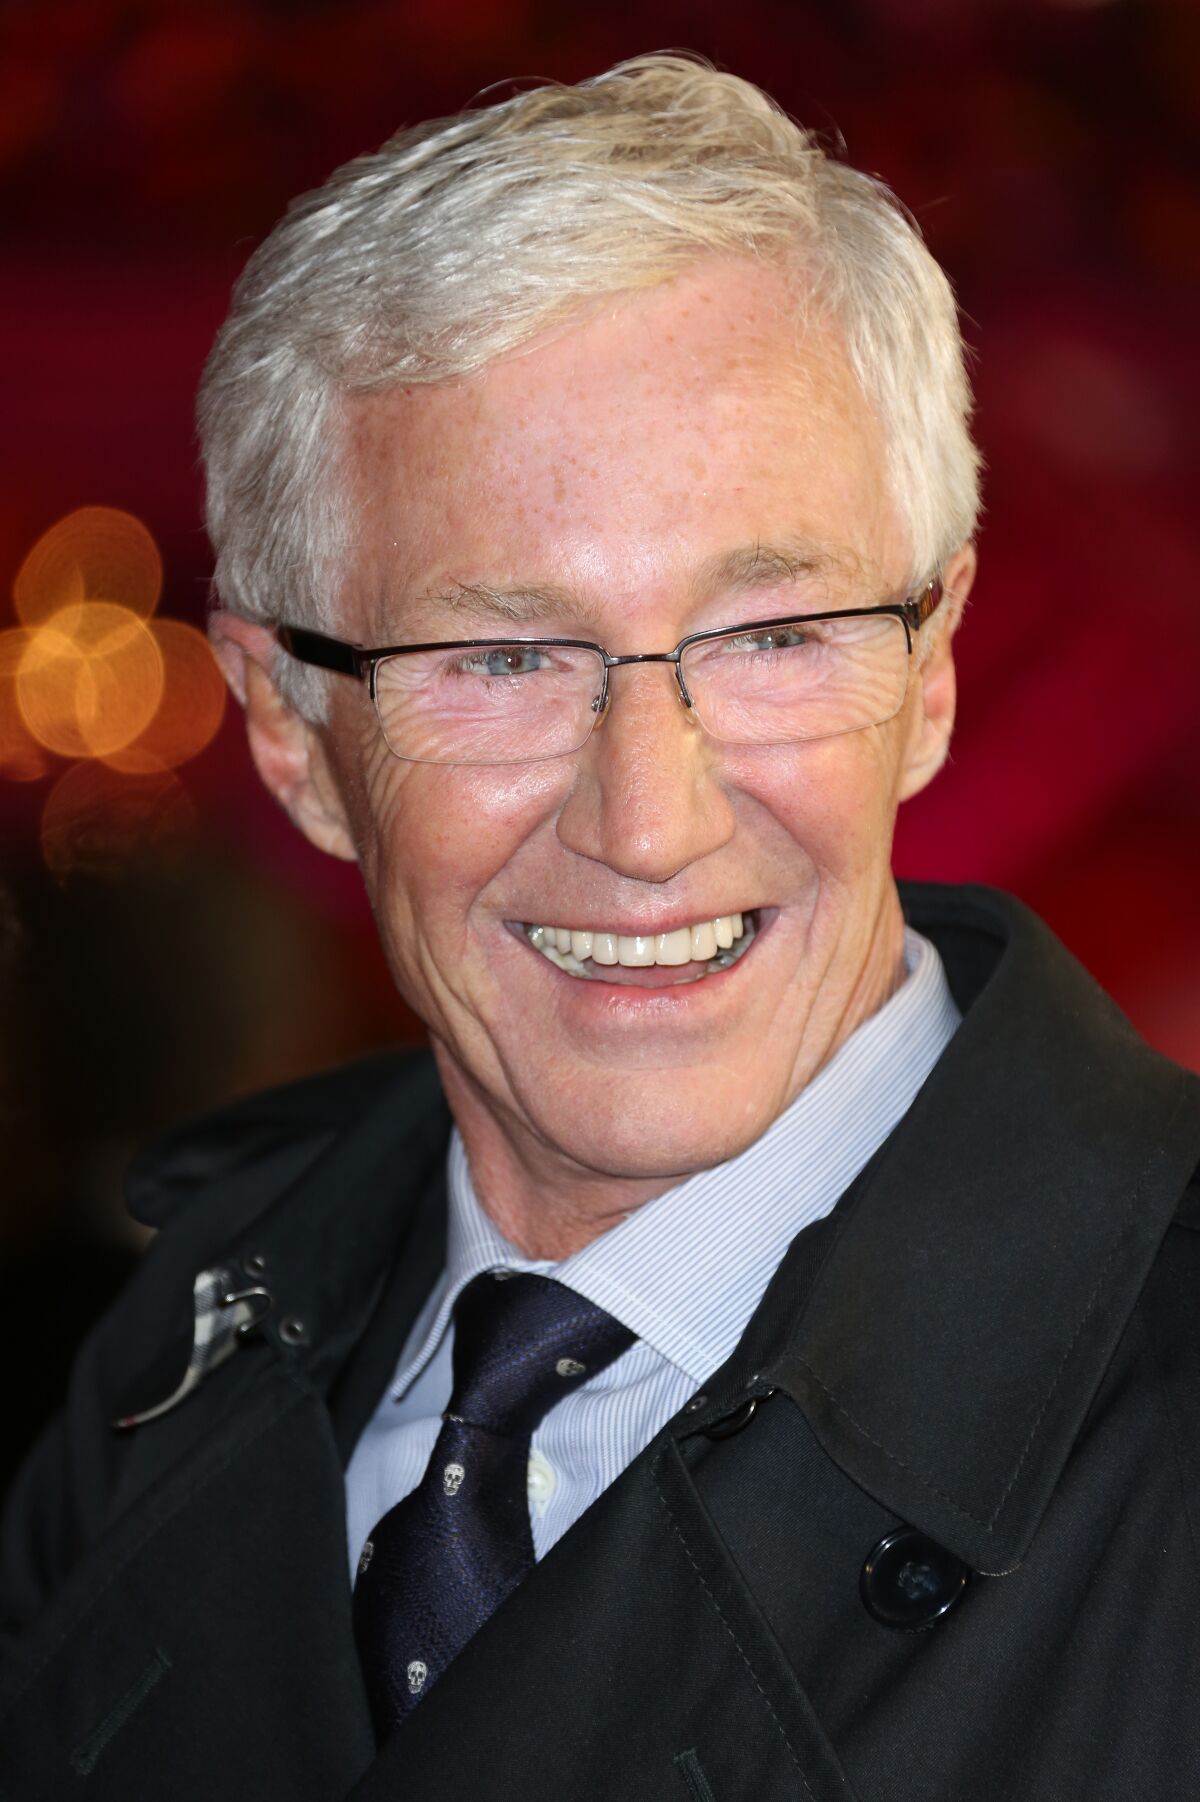 A man with white hair and glasses in a suit smiling